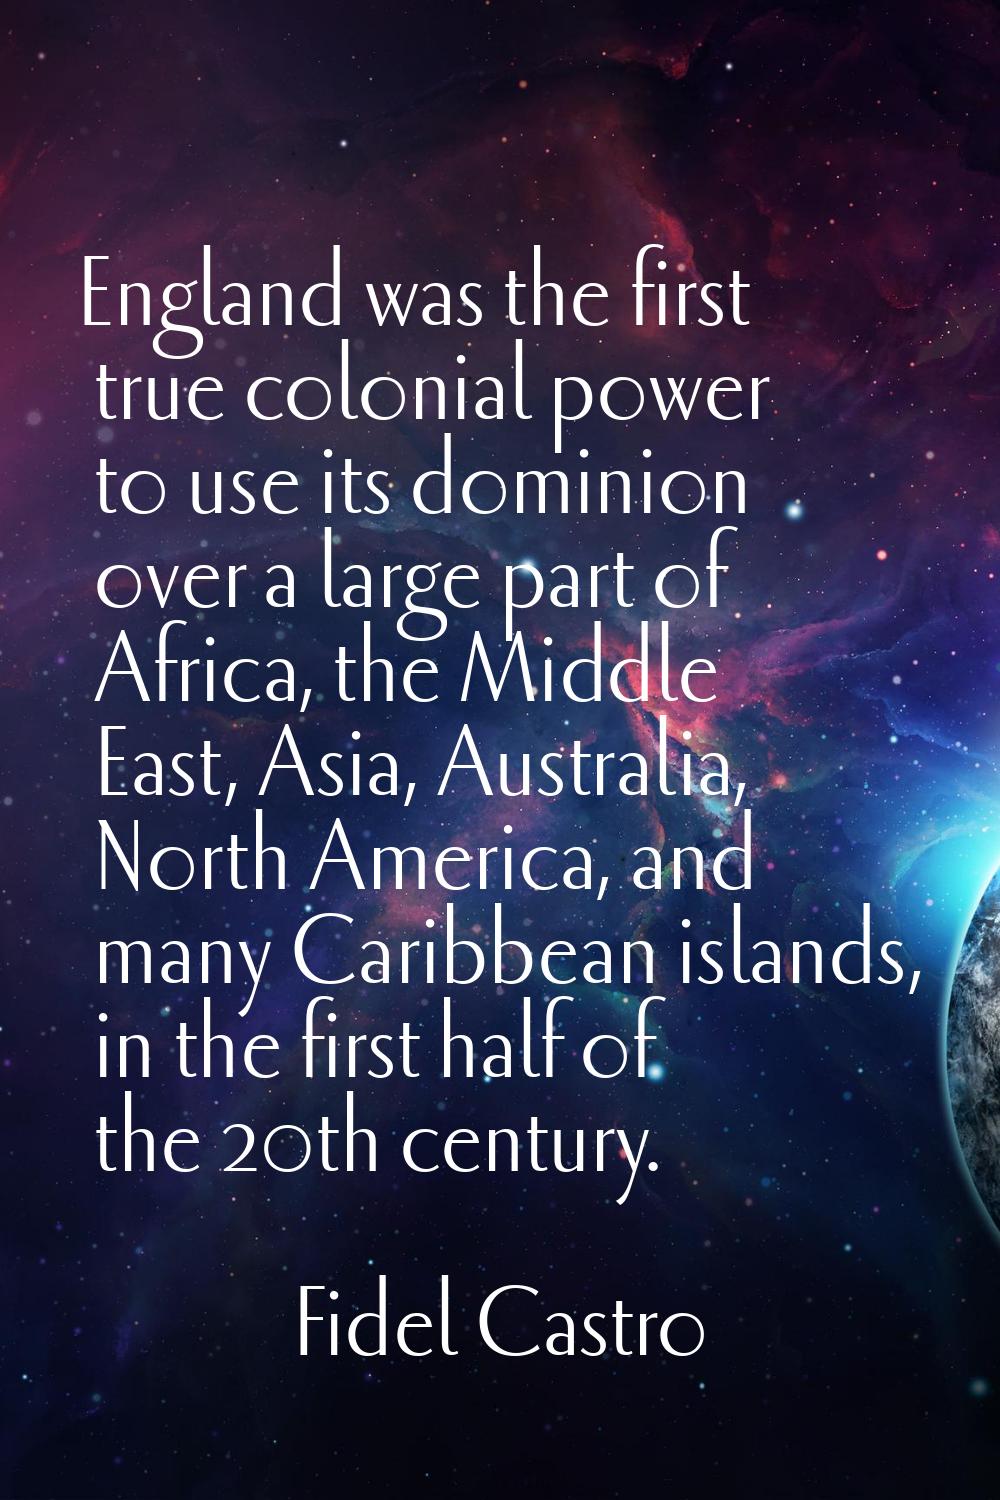 England was the first true colonial power to use its dominion over a large part of Africa, the Midd